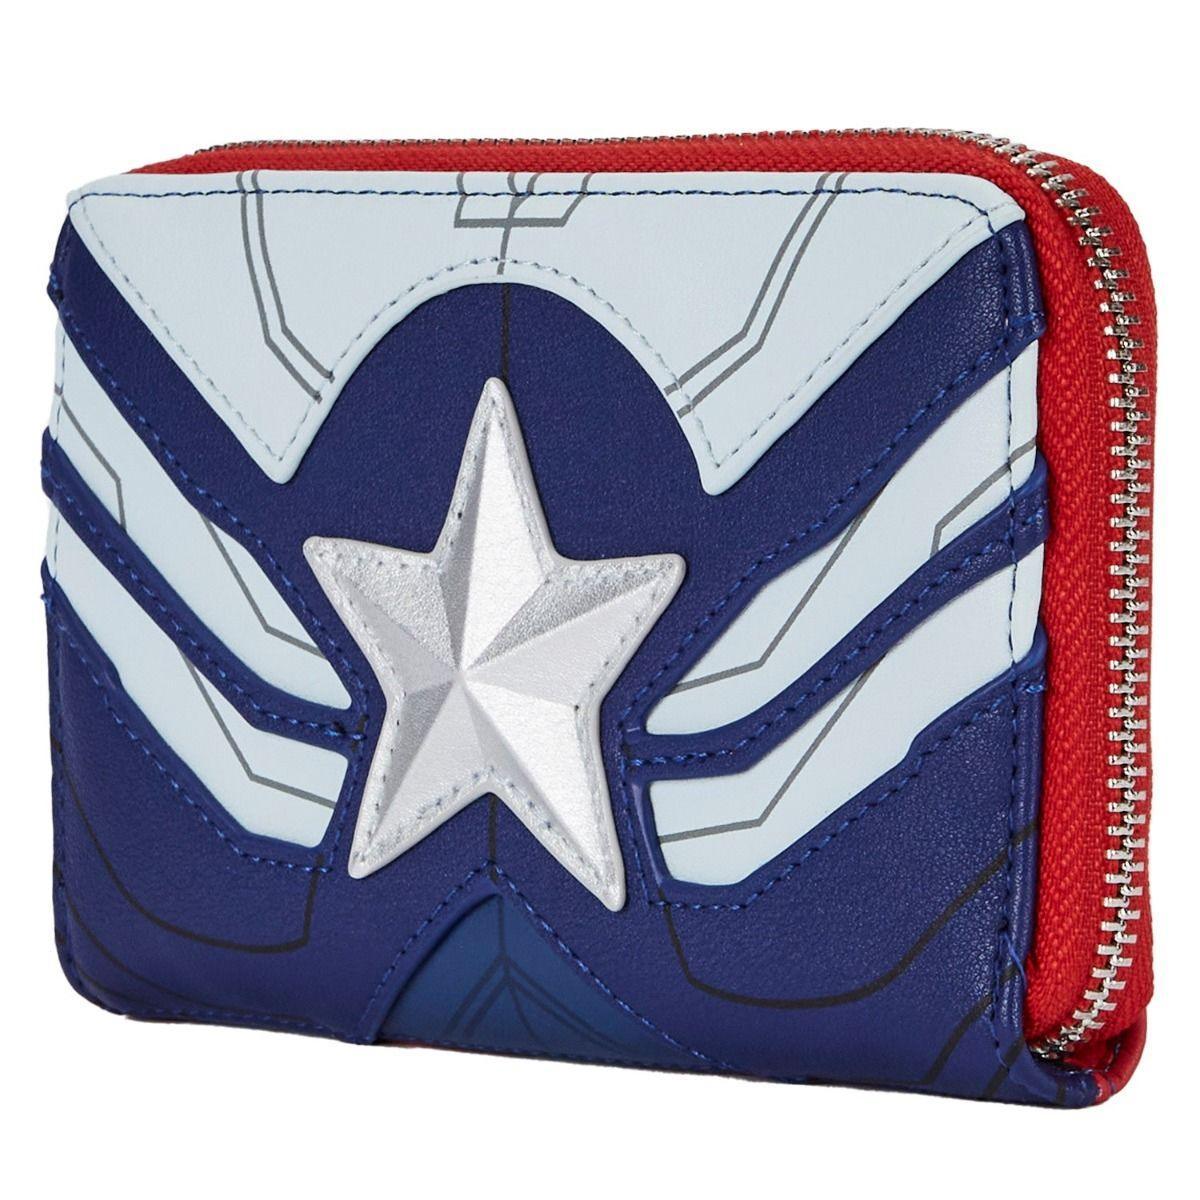 LOUMVWA0161 The Falcon and the Winter Soldier - Captain America Zip Purse - Loungefly - Titan Pop Culture